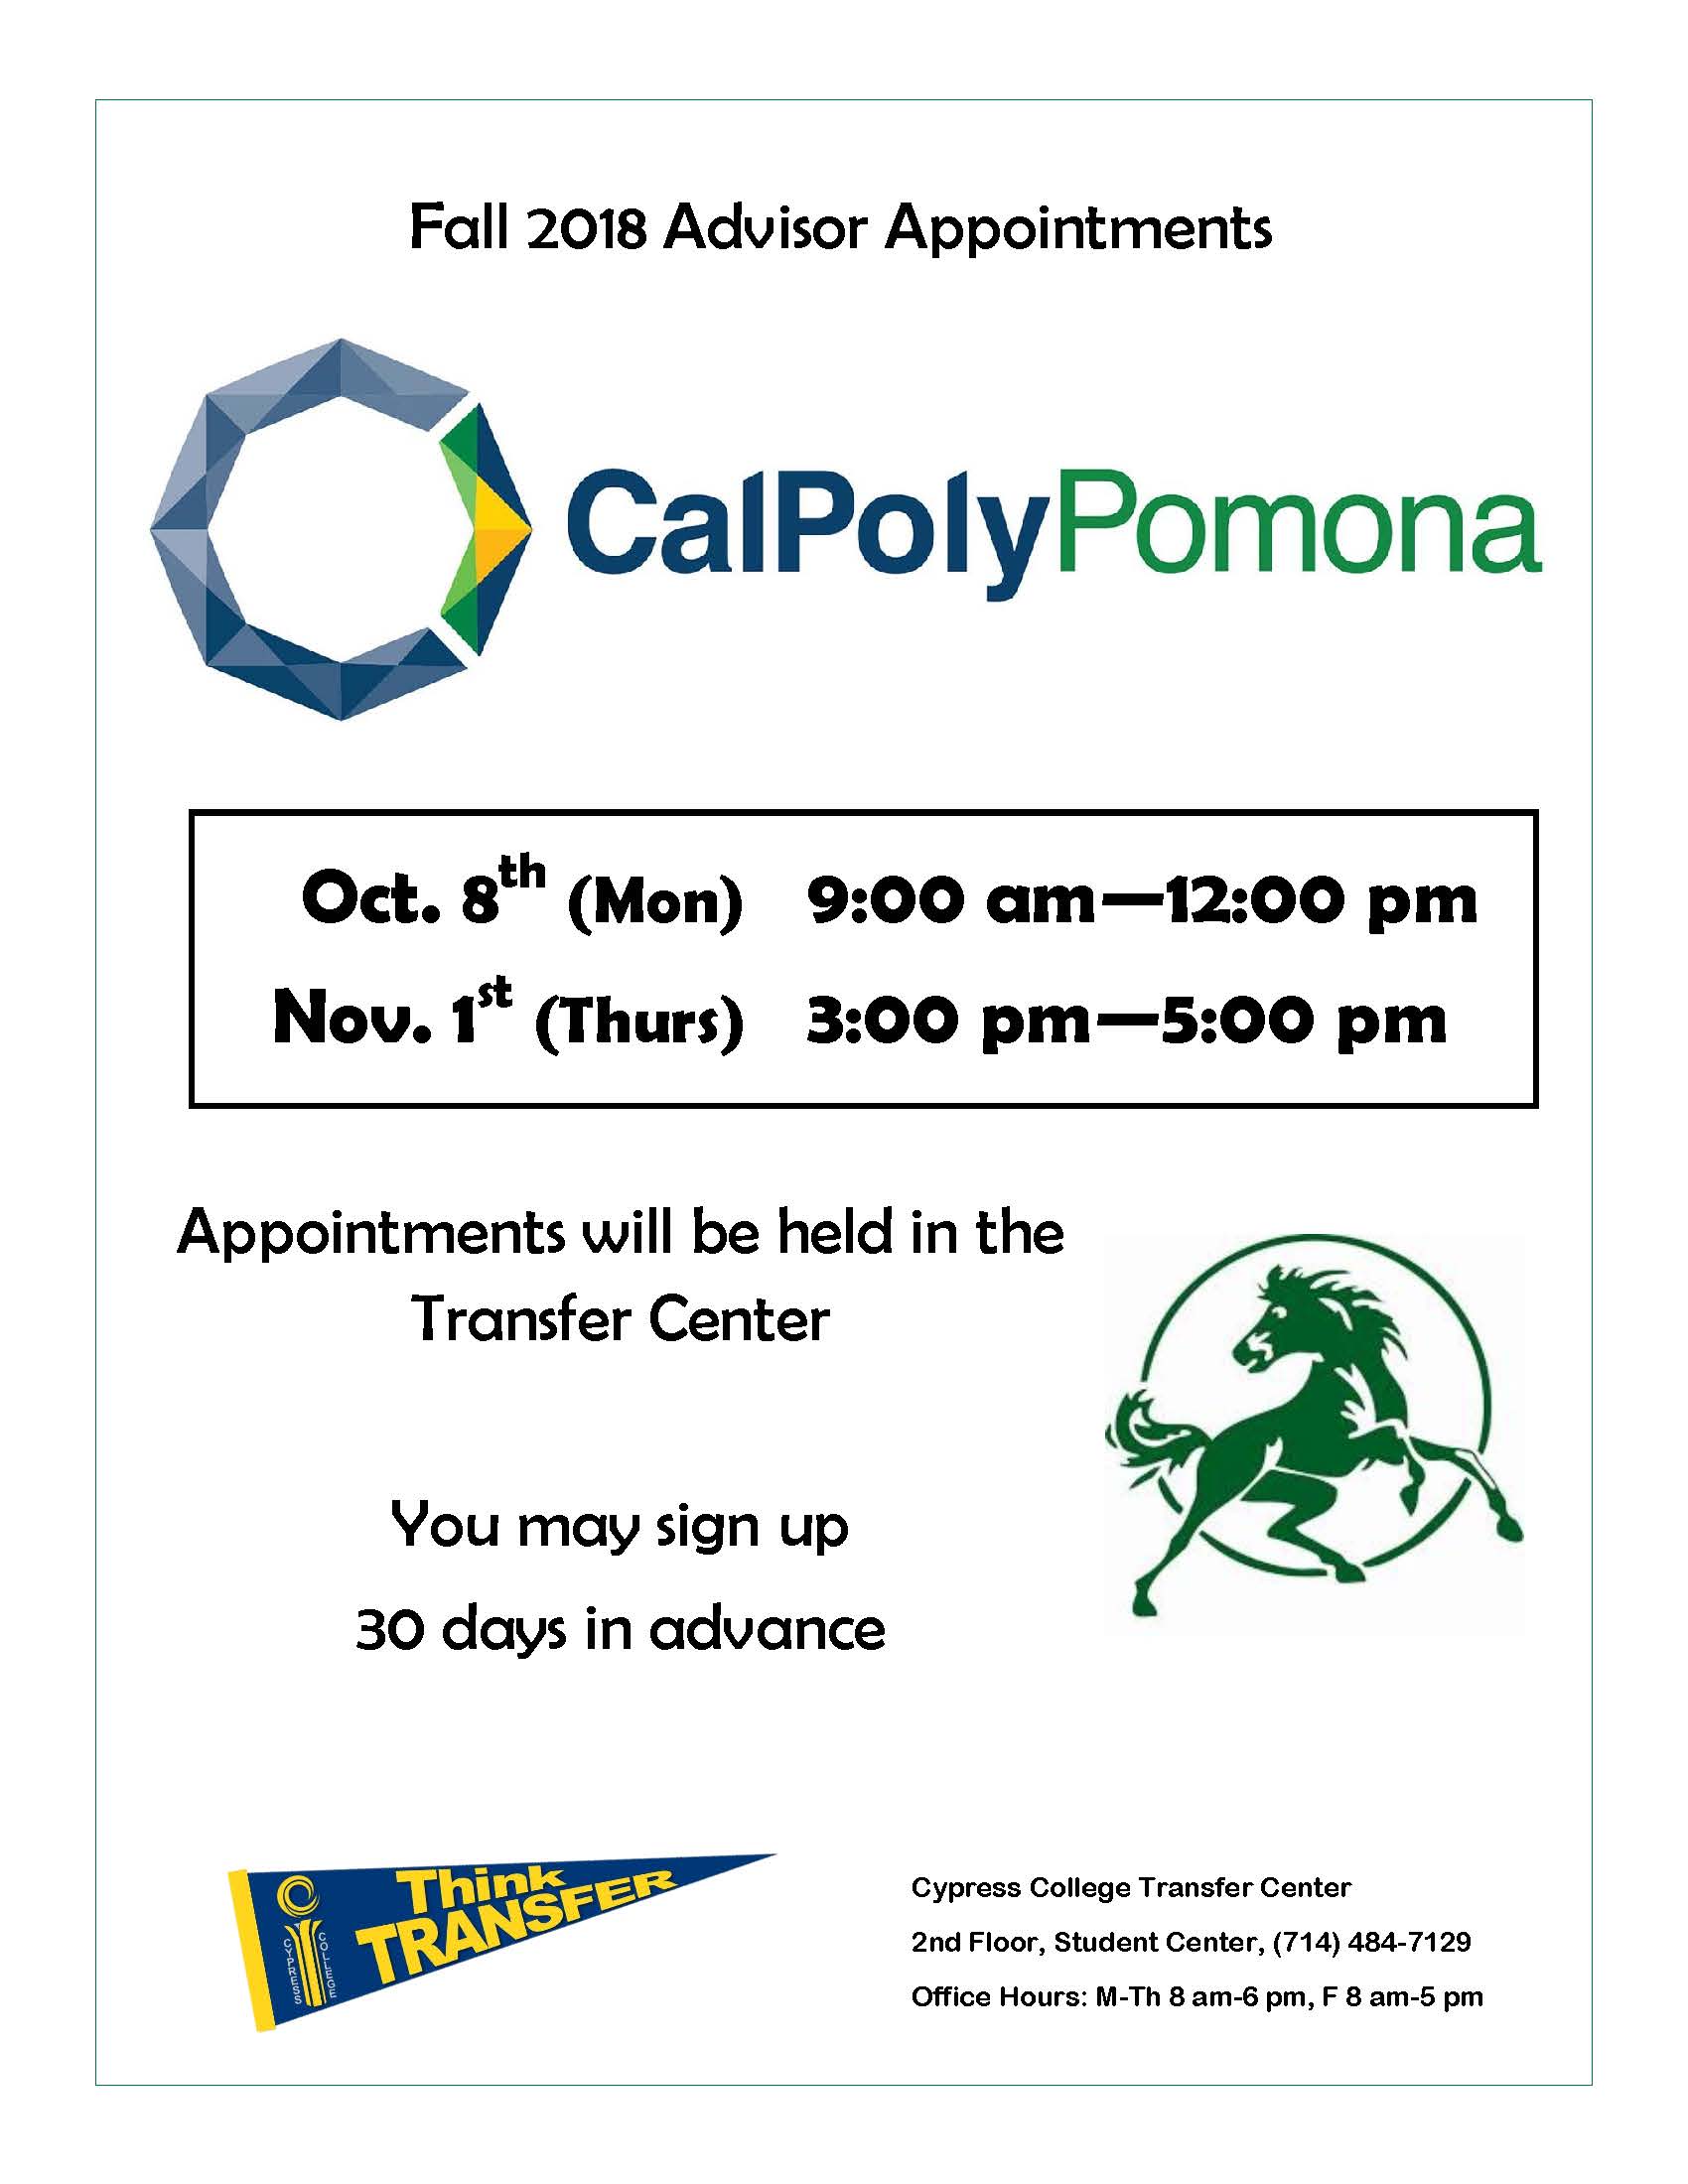 Fall 2018 Advisor Appointments Cal Poly Pomona flyer.